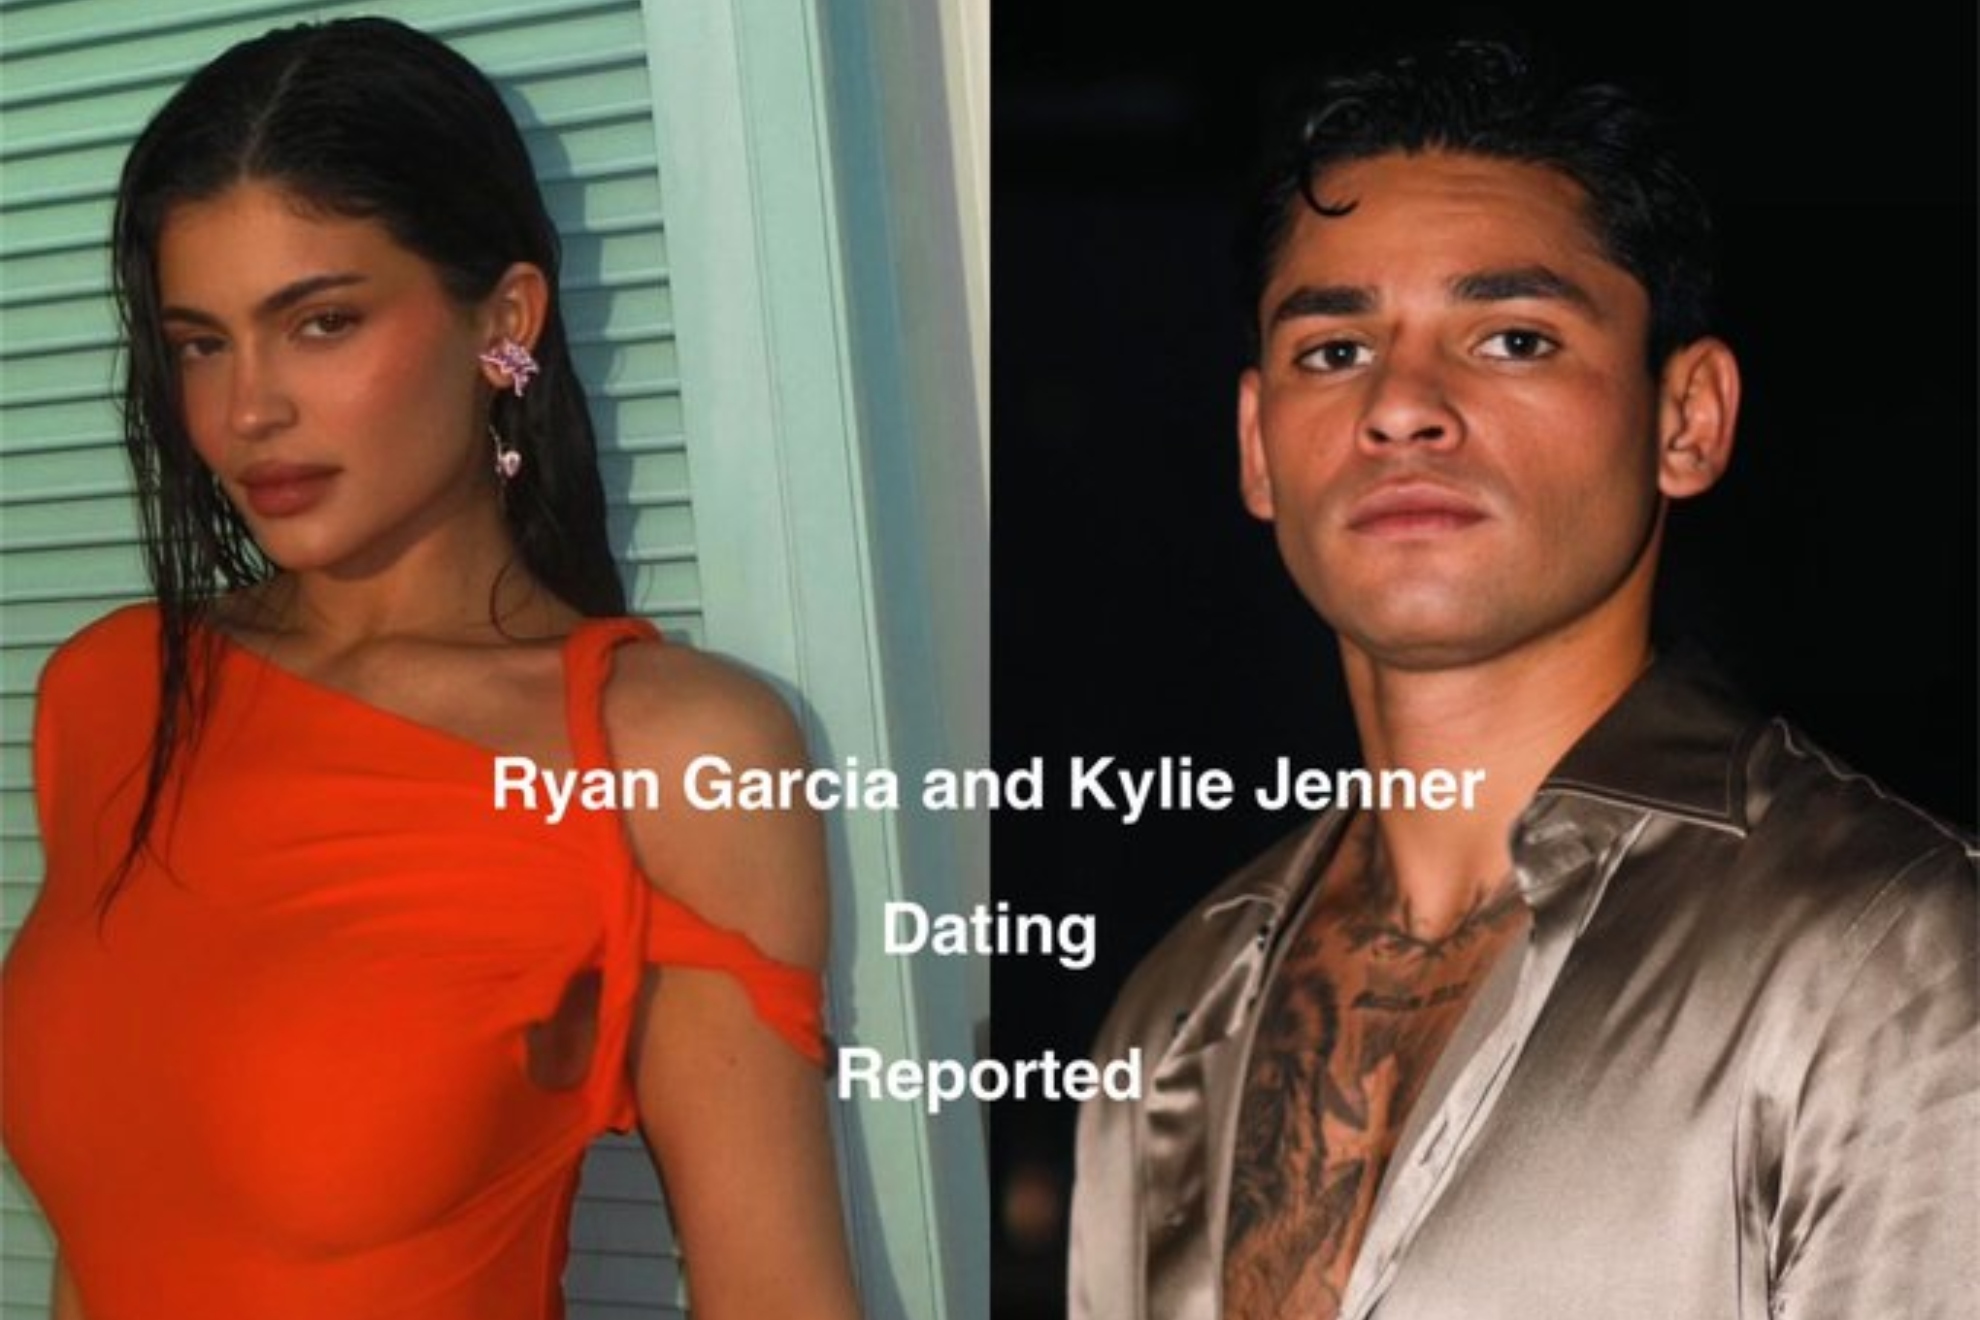 Ryan Garcia claims hes dating Kylie Jenner in a very creepy way concerning fans about his mental health